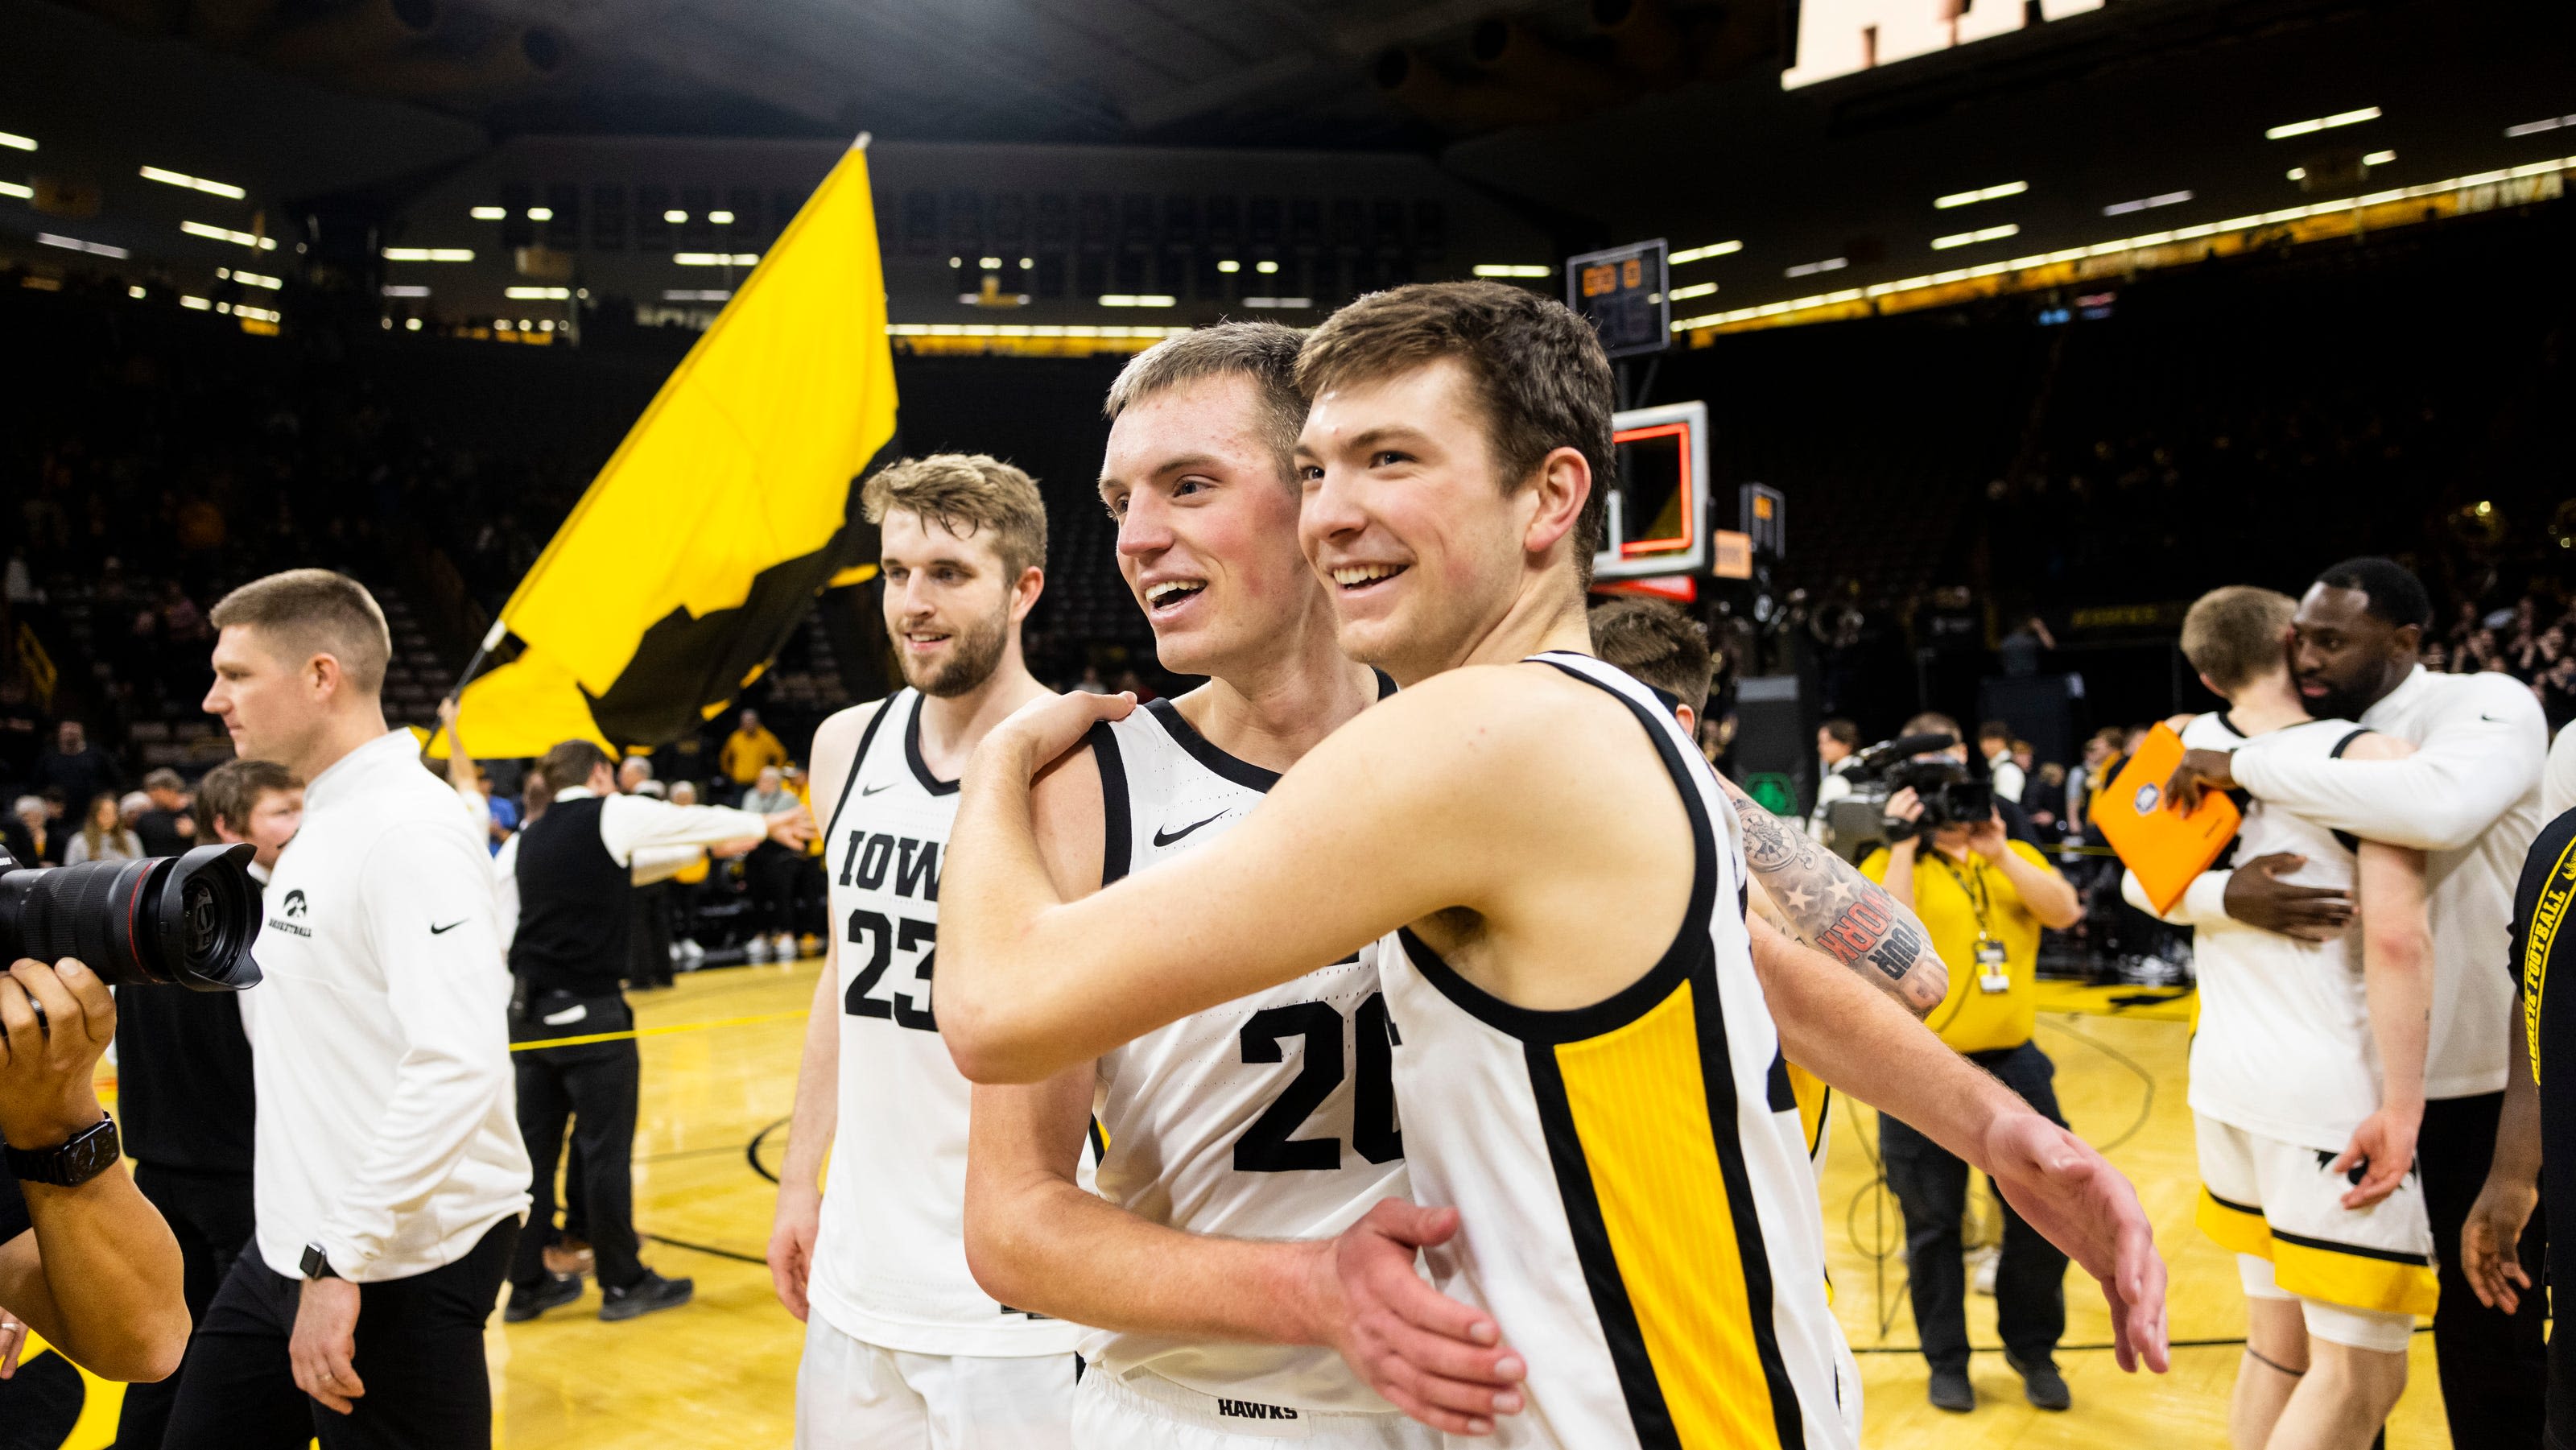 Iowa basketball continues offseason roll with Payton Sandfort's return: 'Sky's the limit'